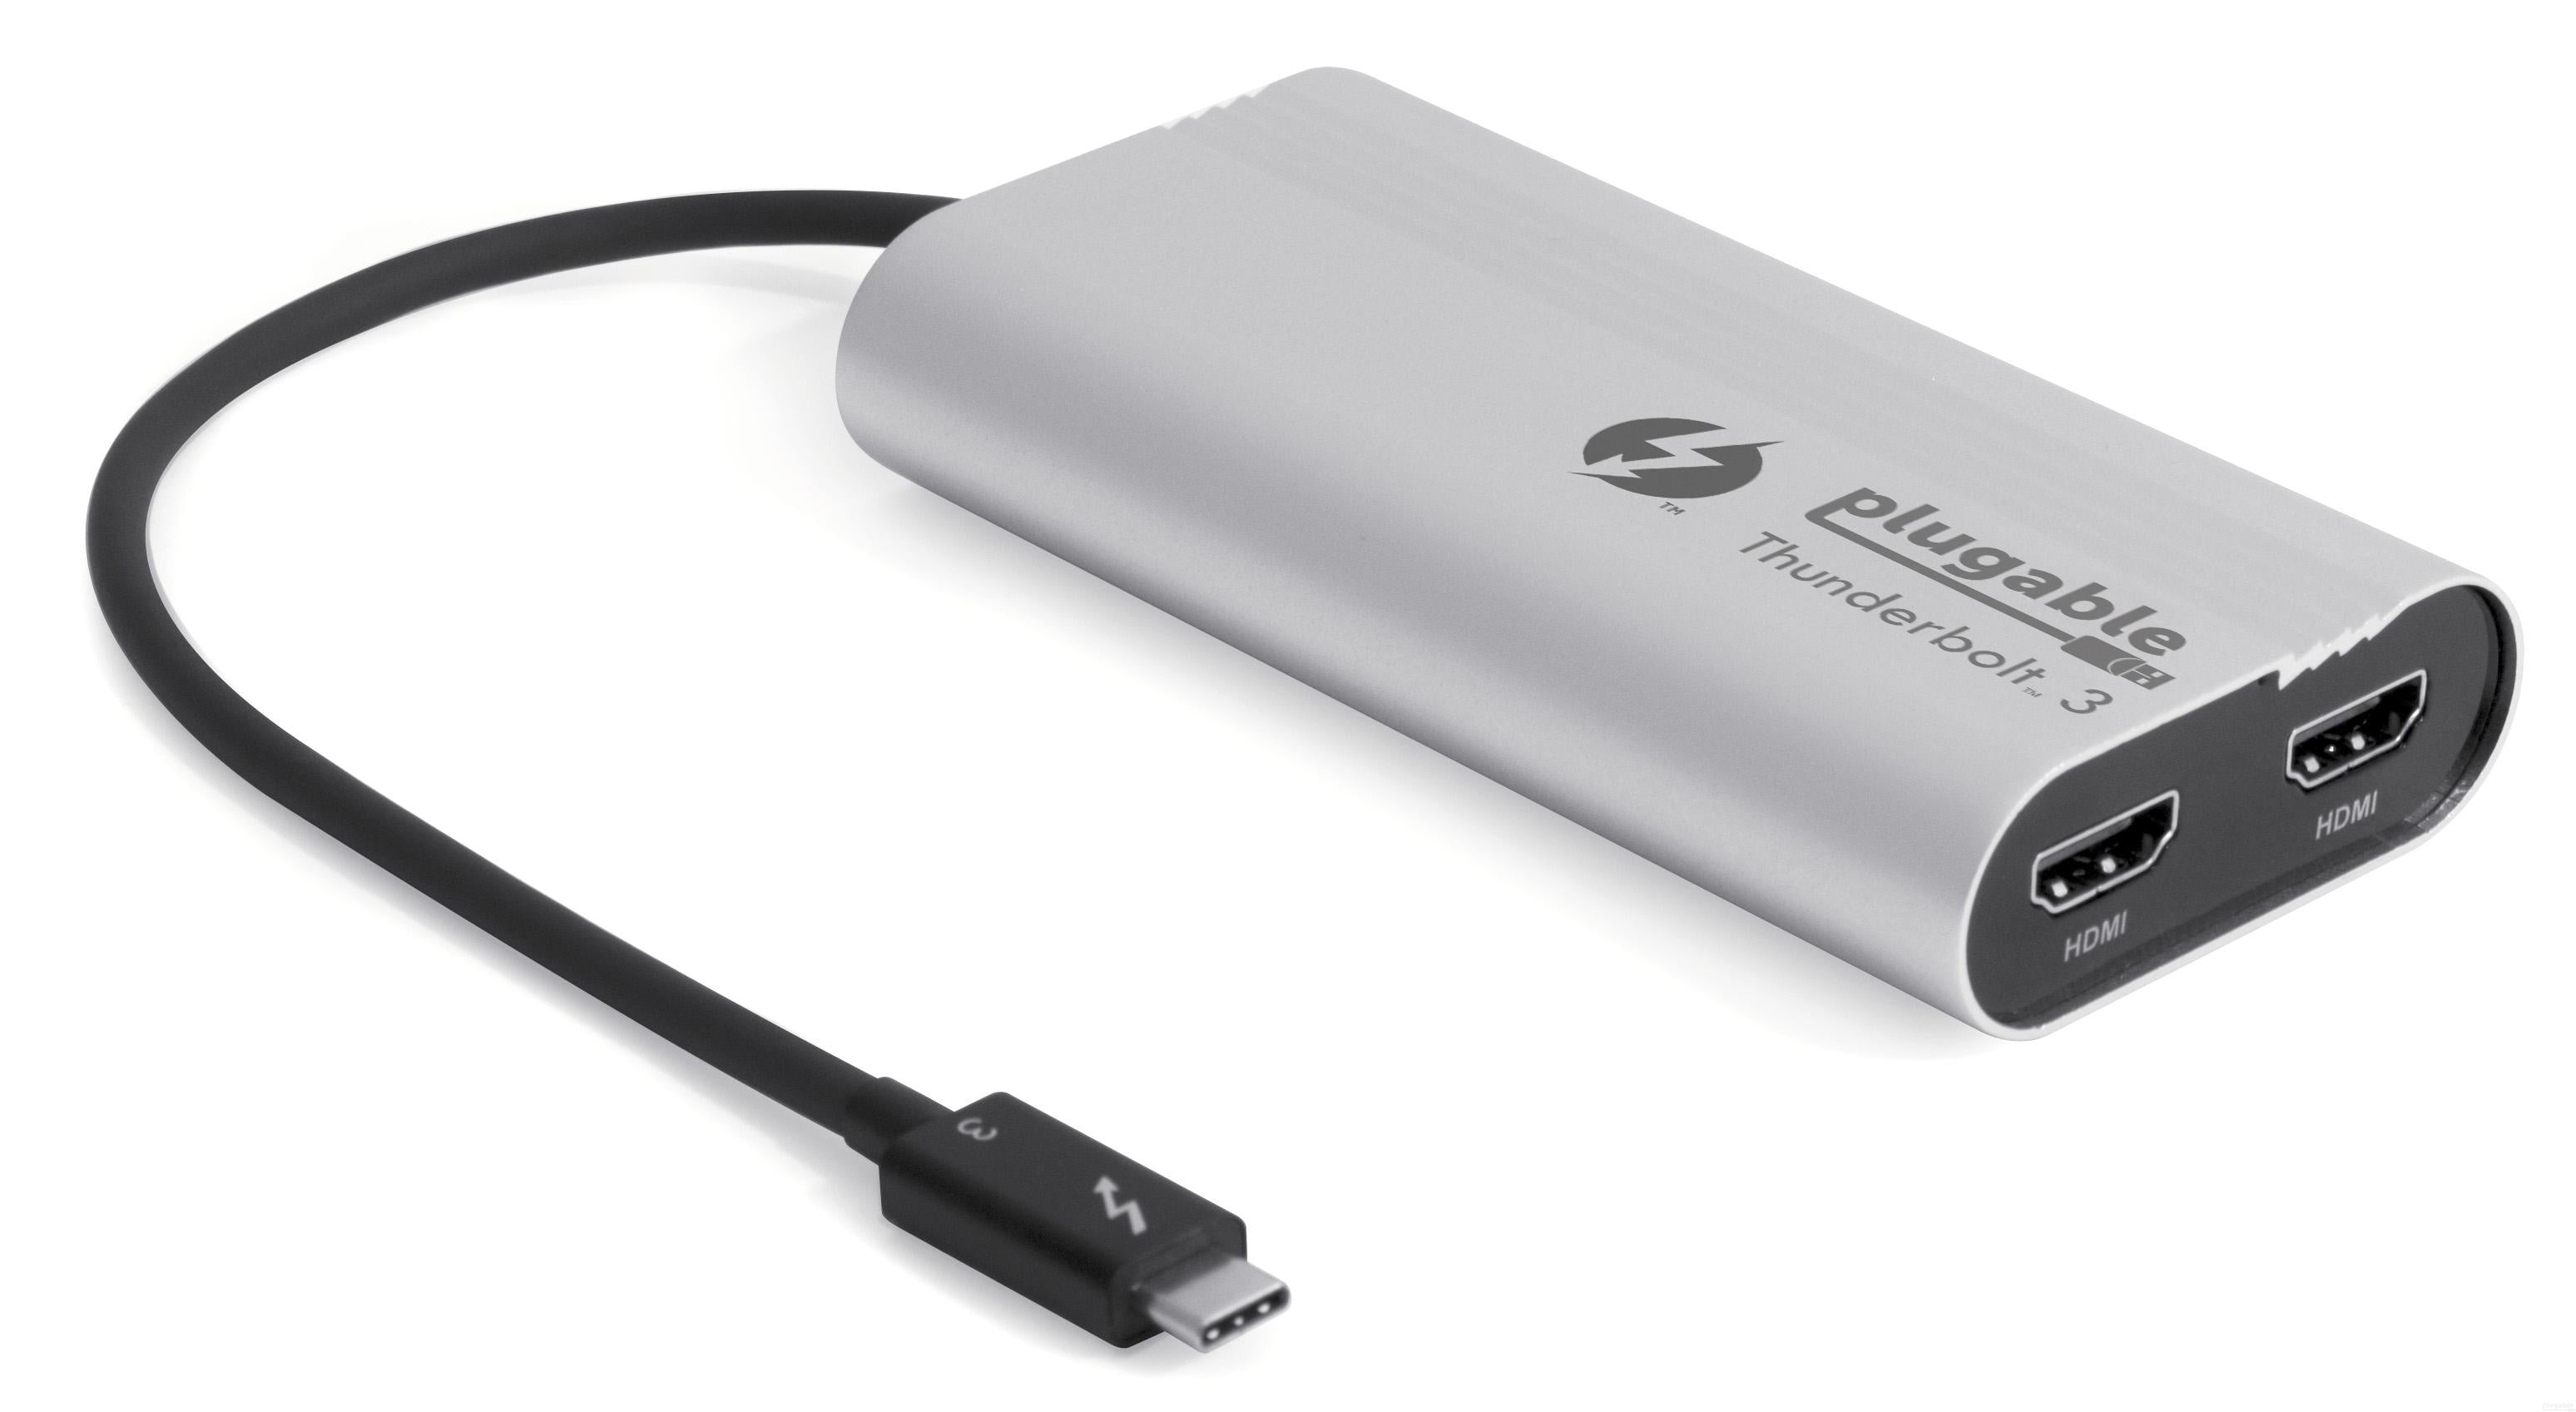 Catena form Kurve Plugable Thunderbolt™ 3 Dual Display HDMI 2.0 Adapter for Mac and Wind –  Plugable Technologies